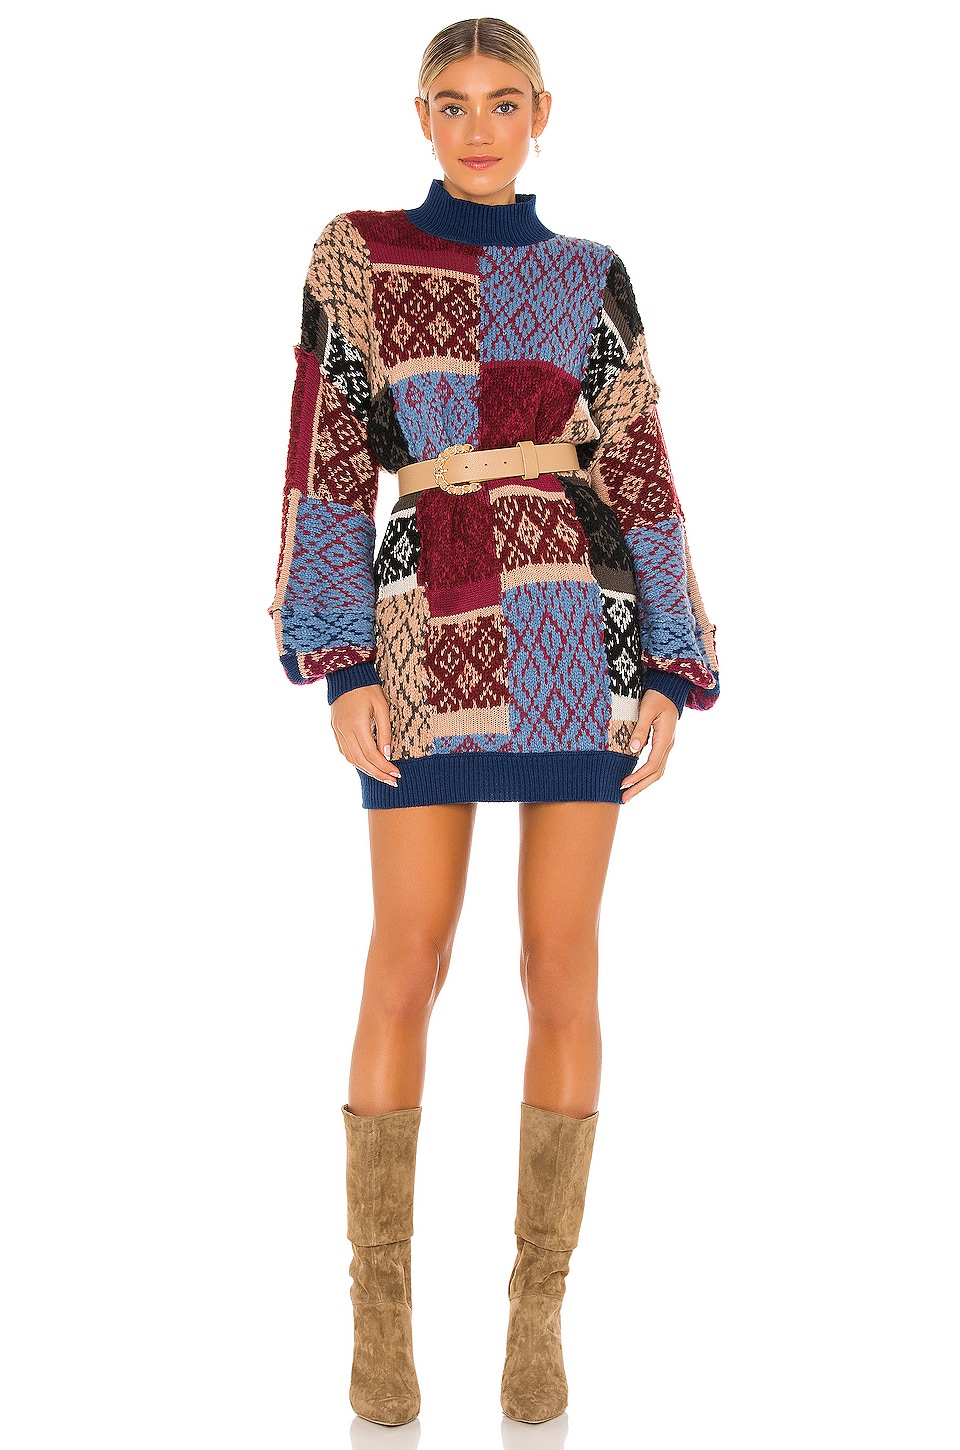 Free People Patched Argyle Dress in Ivy League Combo | REVOLVE